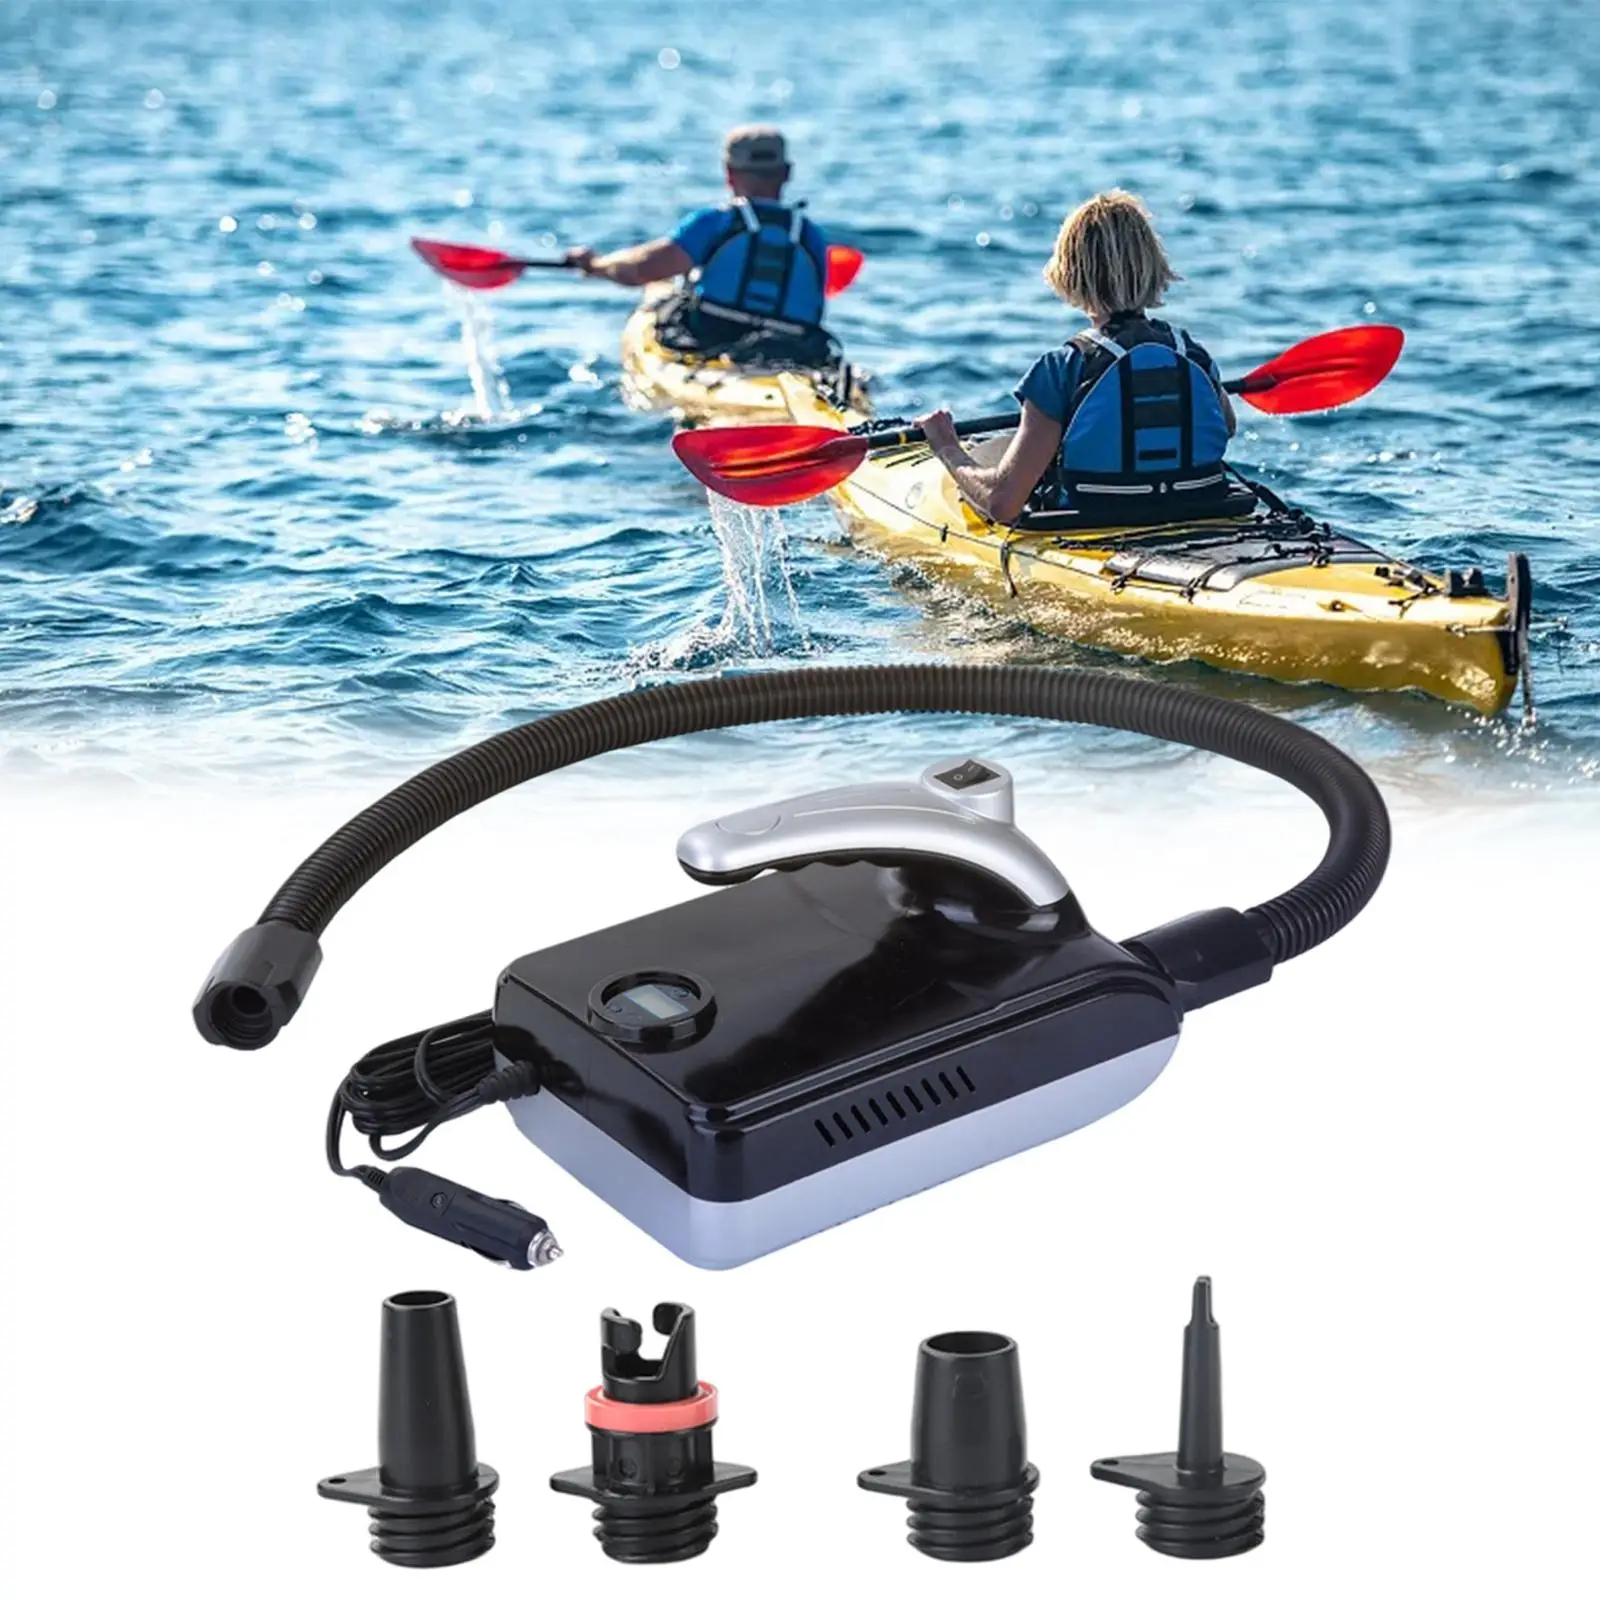 0~20PSI Electric Air Pump Digital 10A W/ 4 Nozzles W/ Display Electric Pump Inflator Deflator for Boat Paddle Board Pools Toys